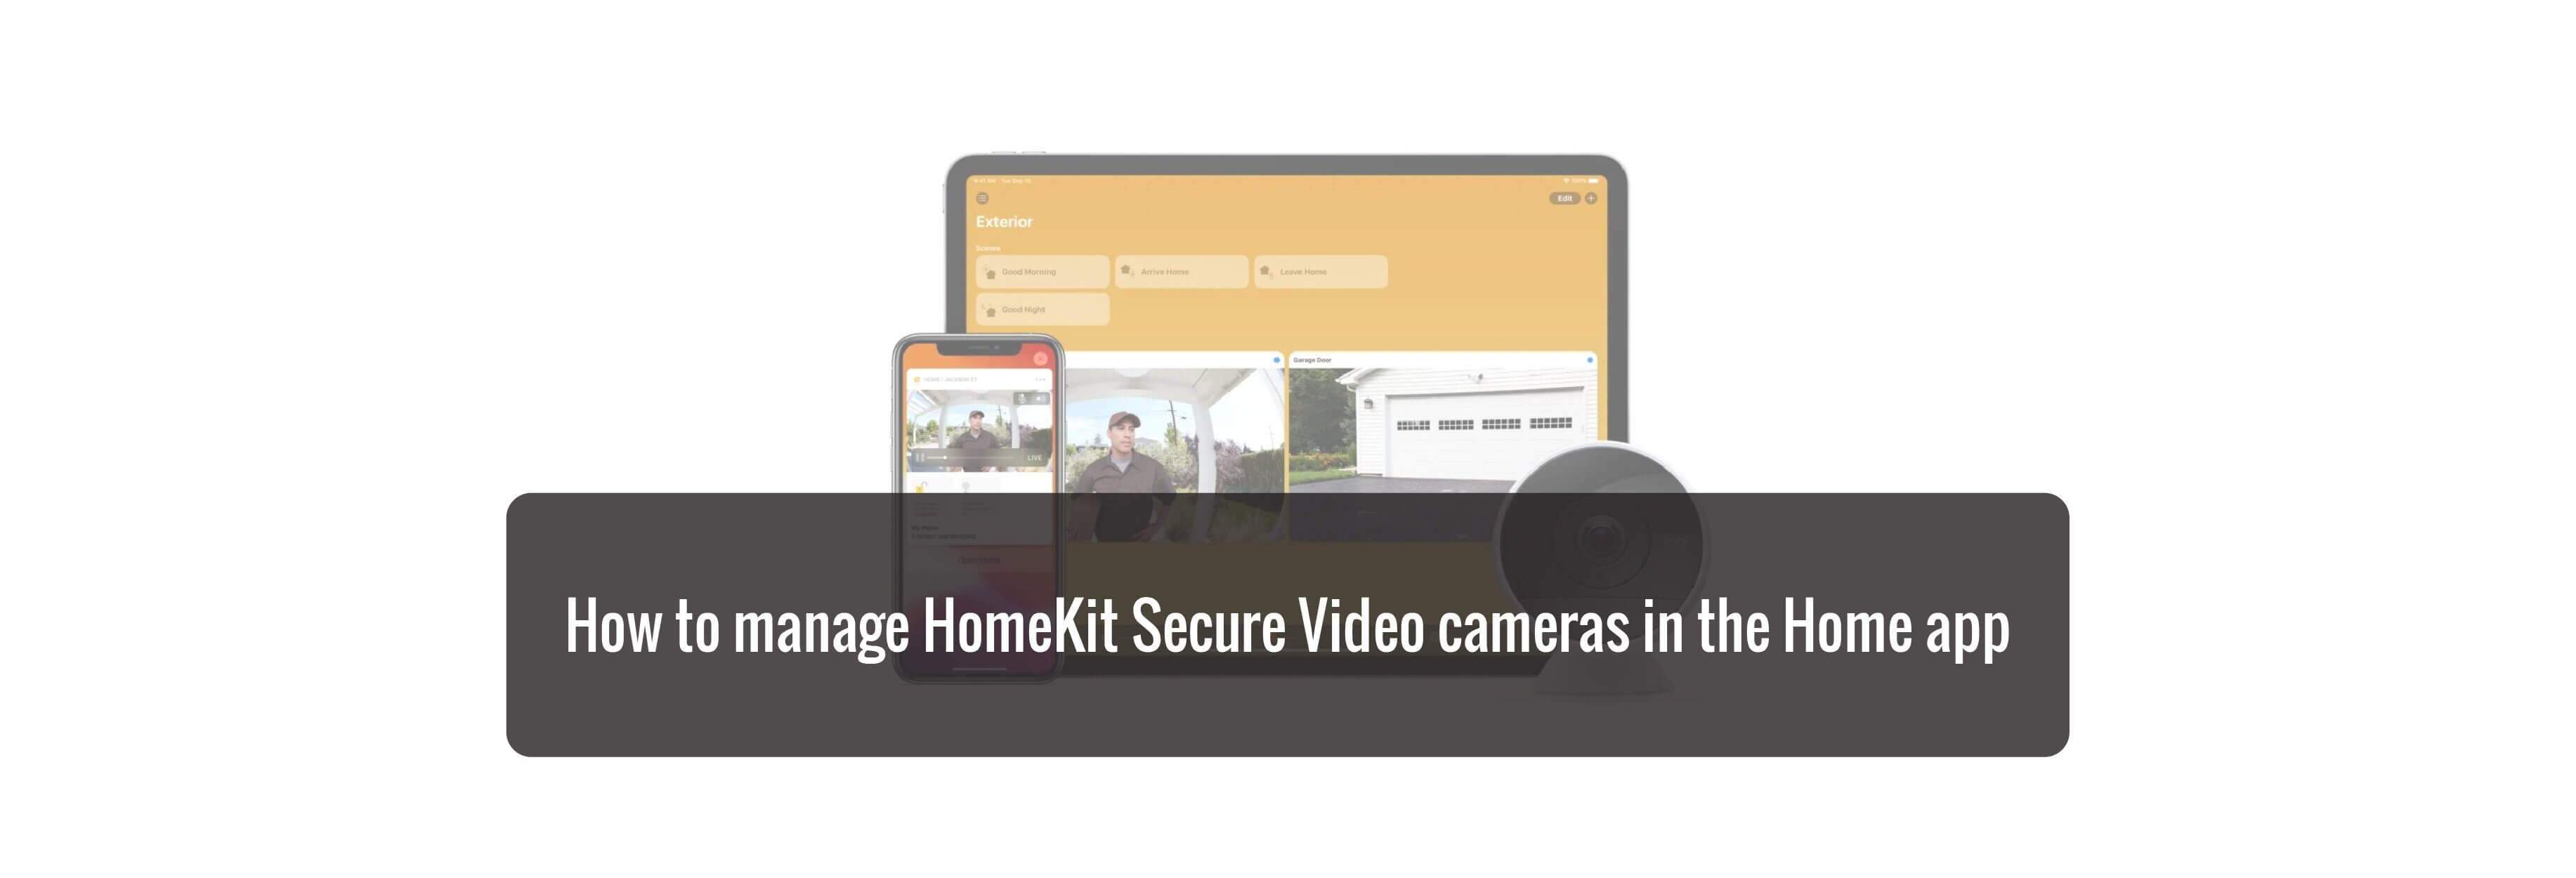 How to manage HomeKit Secure Video cameras in the Home app